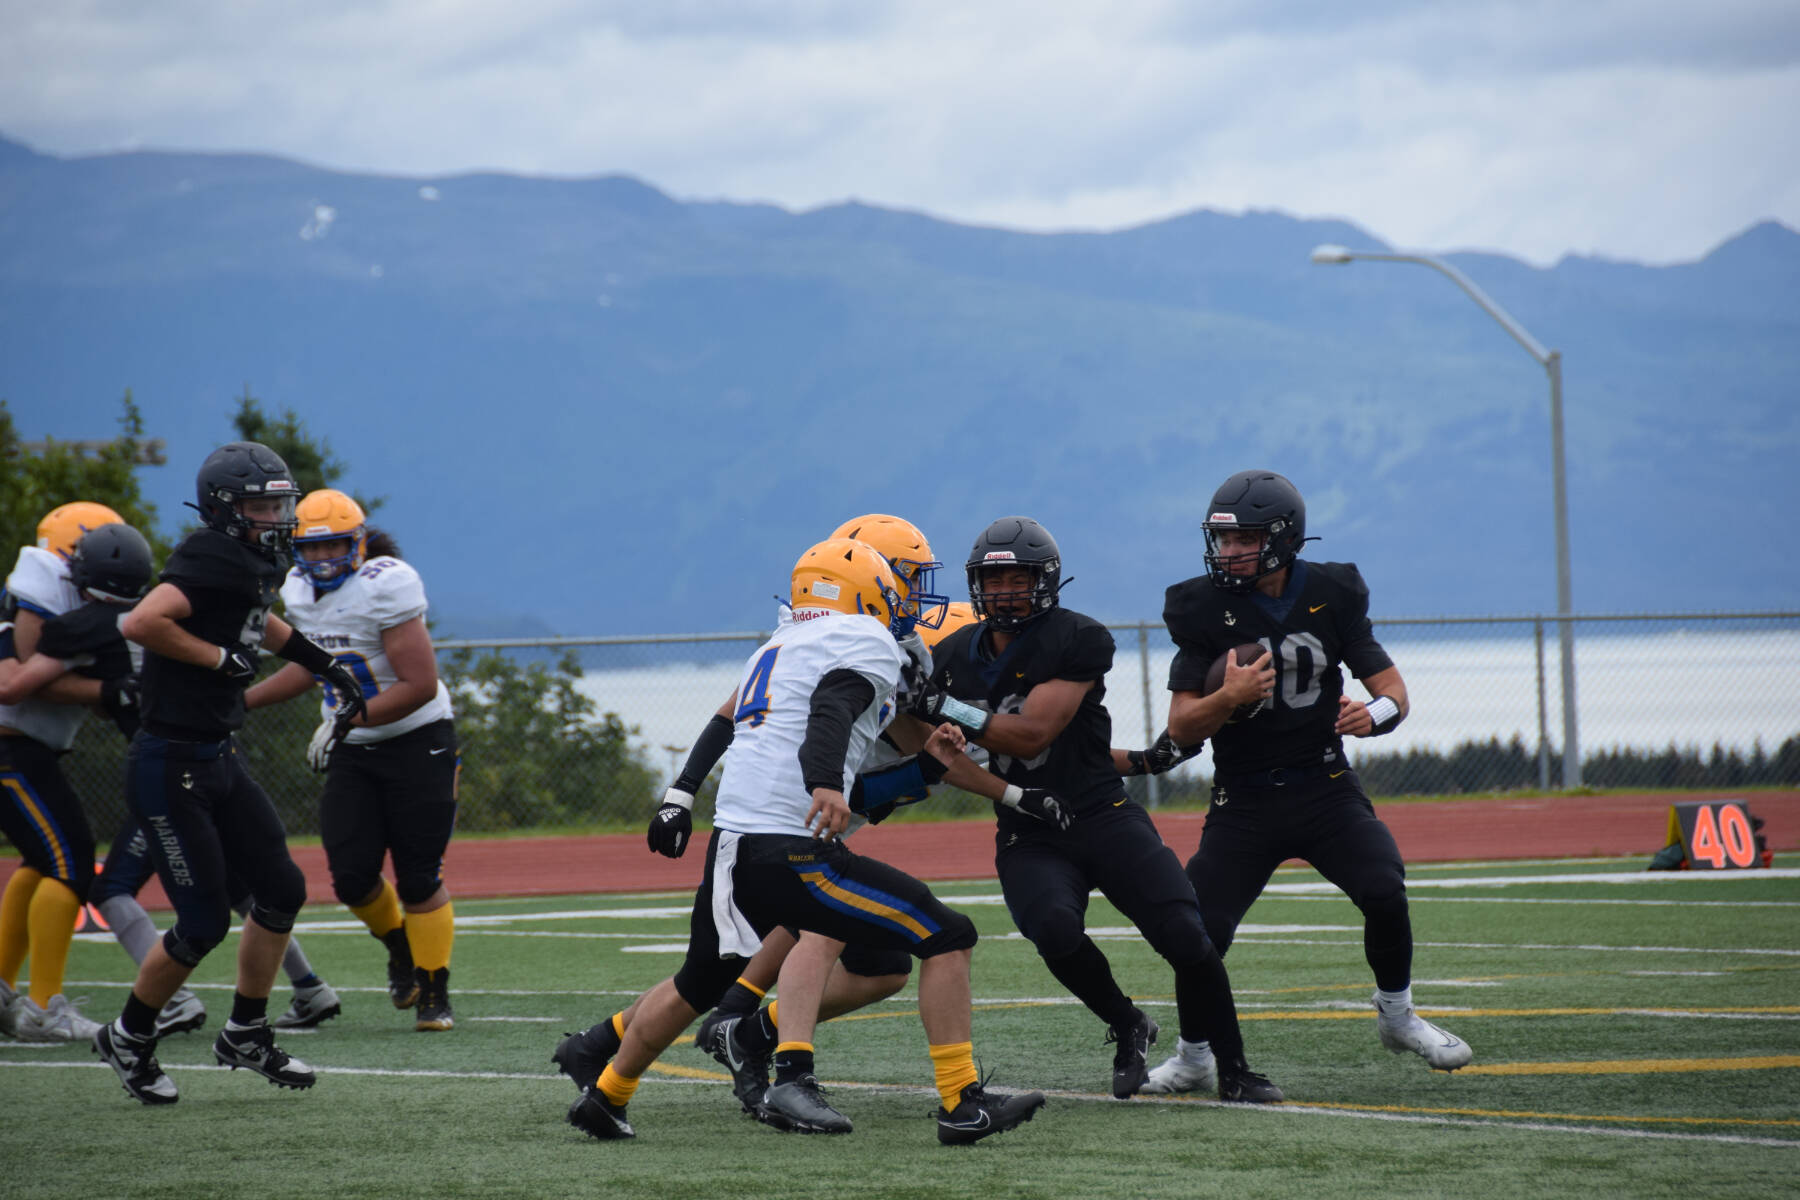 Homer’s Preston Stanislaw defends the ball from Barrow in the third quarter before passing it to Jonah Martin, who scores a touchdown and brings the Mariners’ score up to 36 points during the home opener varsity game on Saturday, Aug. 12, 2023 in Homer, Alaska. (Delcenia Cosman/Homer News)